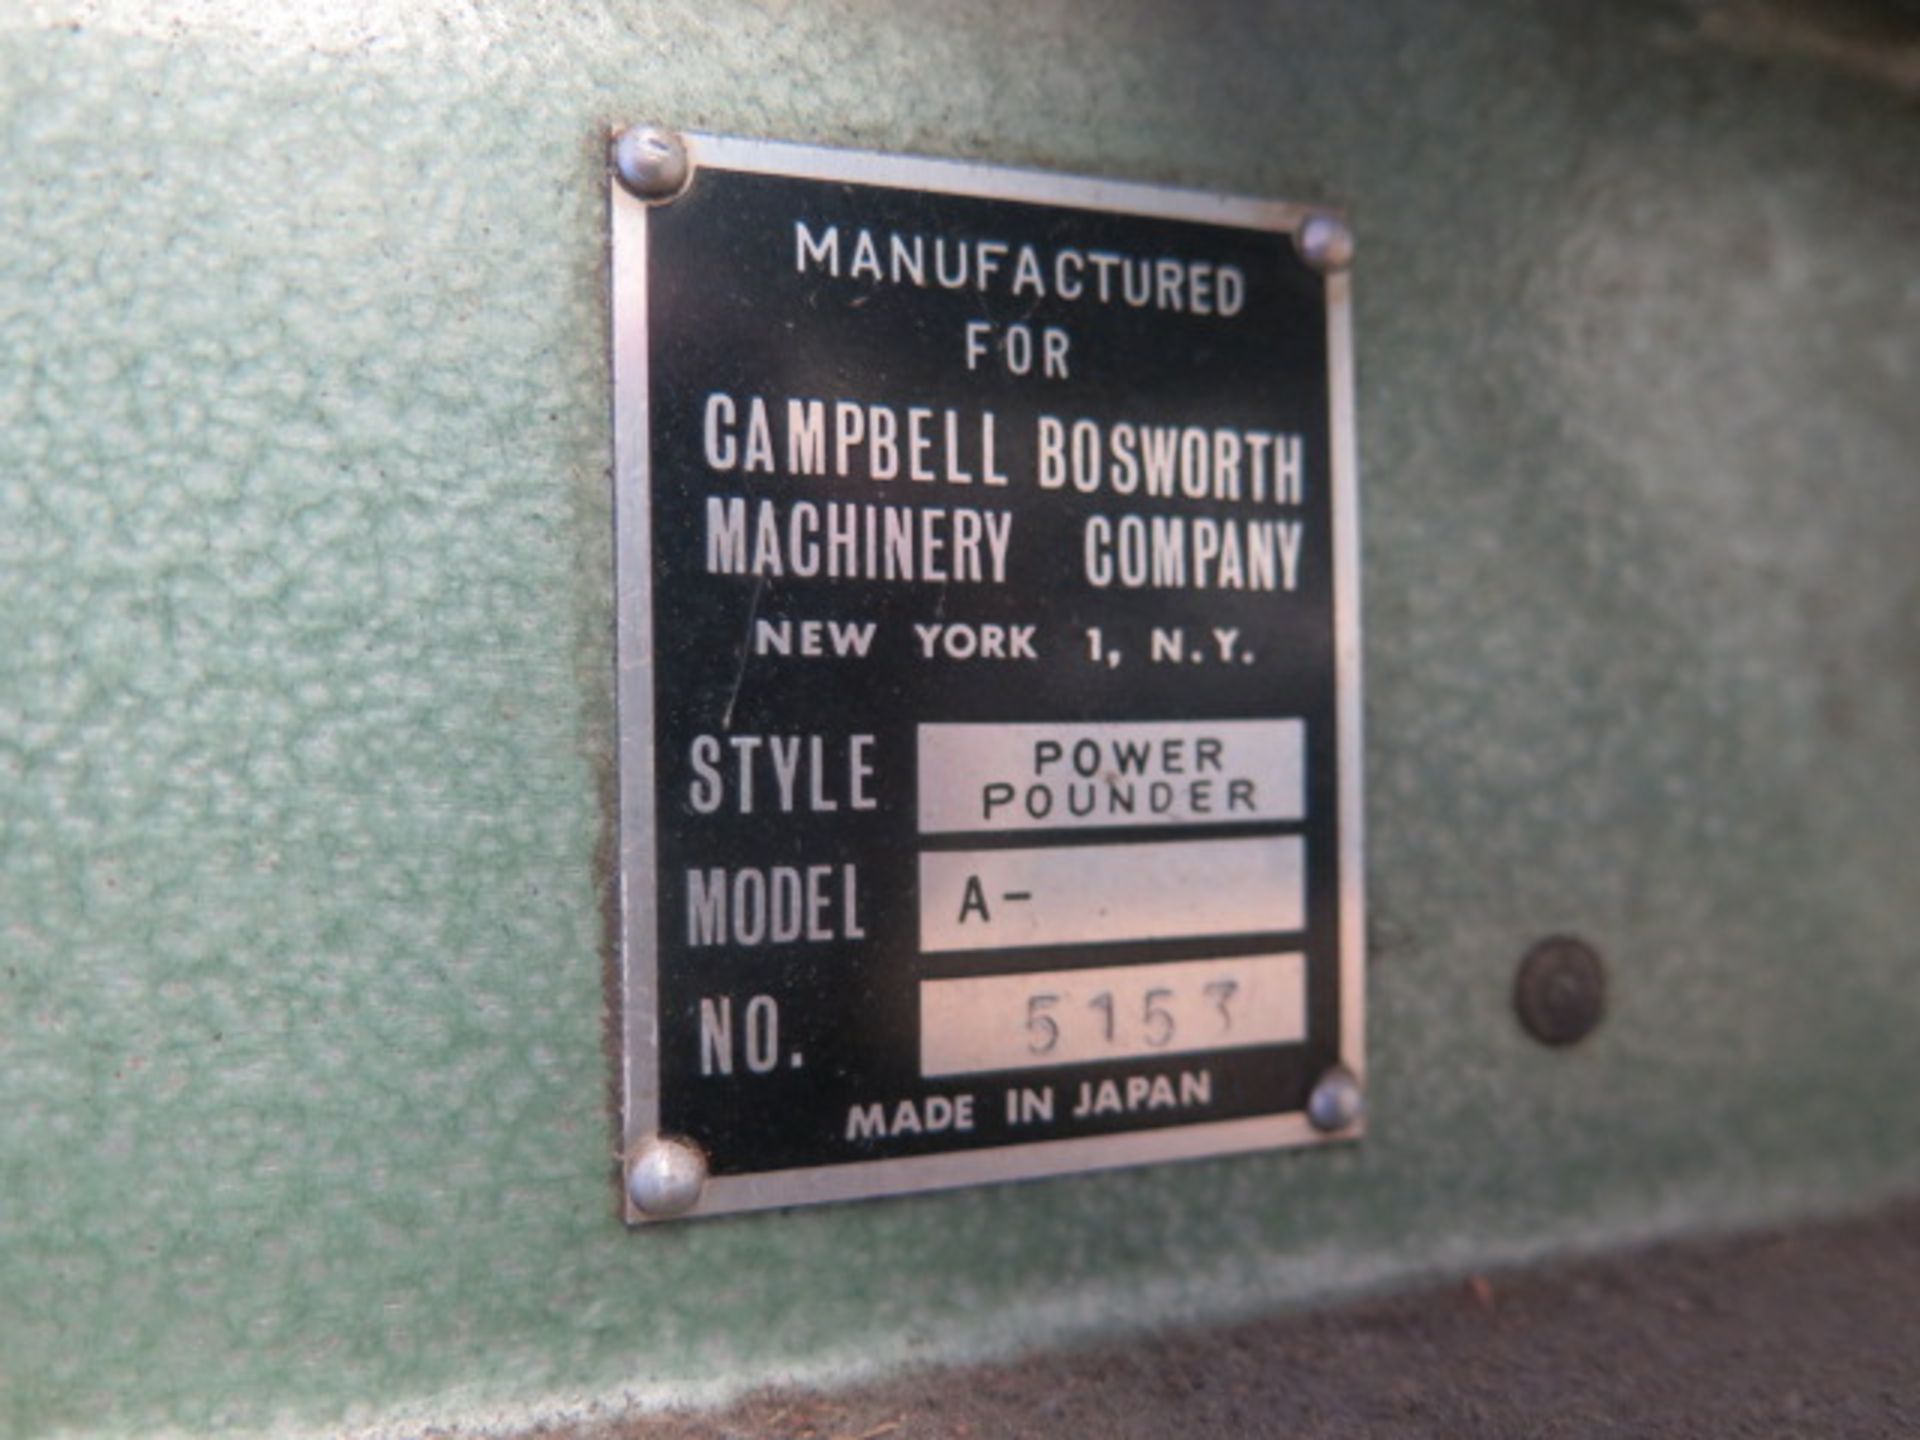 Campbell Bosworth "Power Pounder" mdl. A Press (SOLD AS-IS - NO WARRANTY) - Image 6 of 6